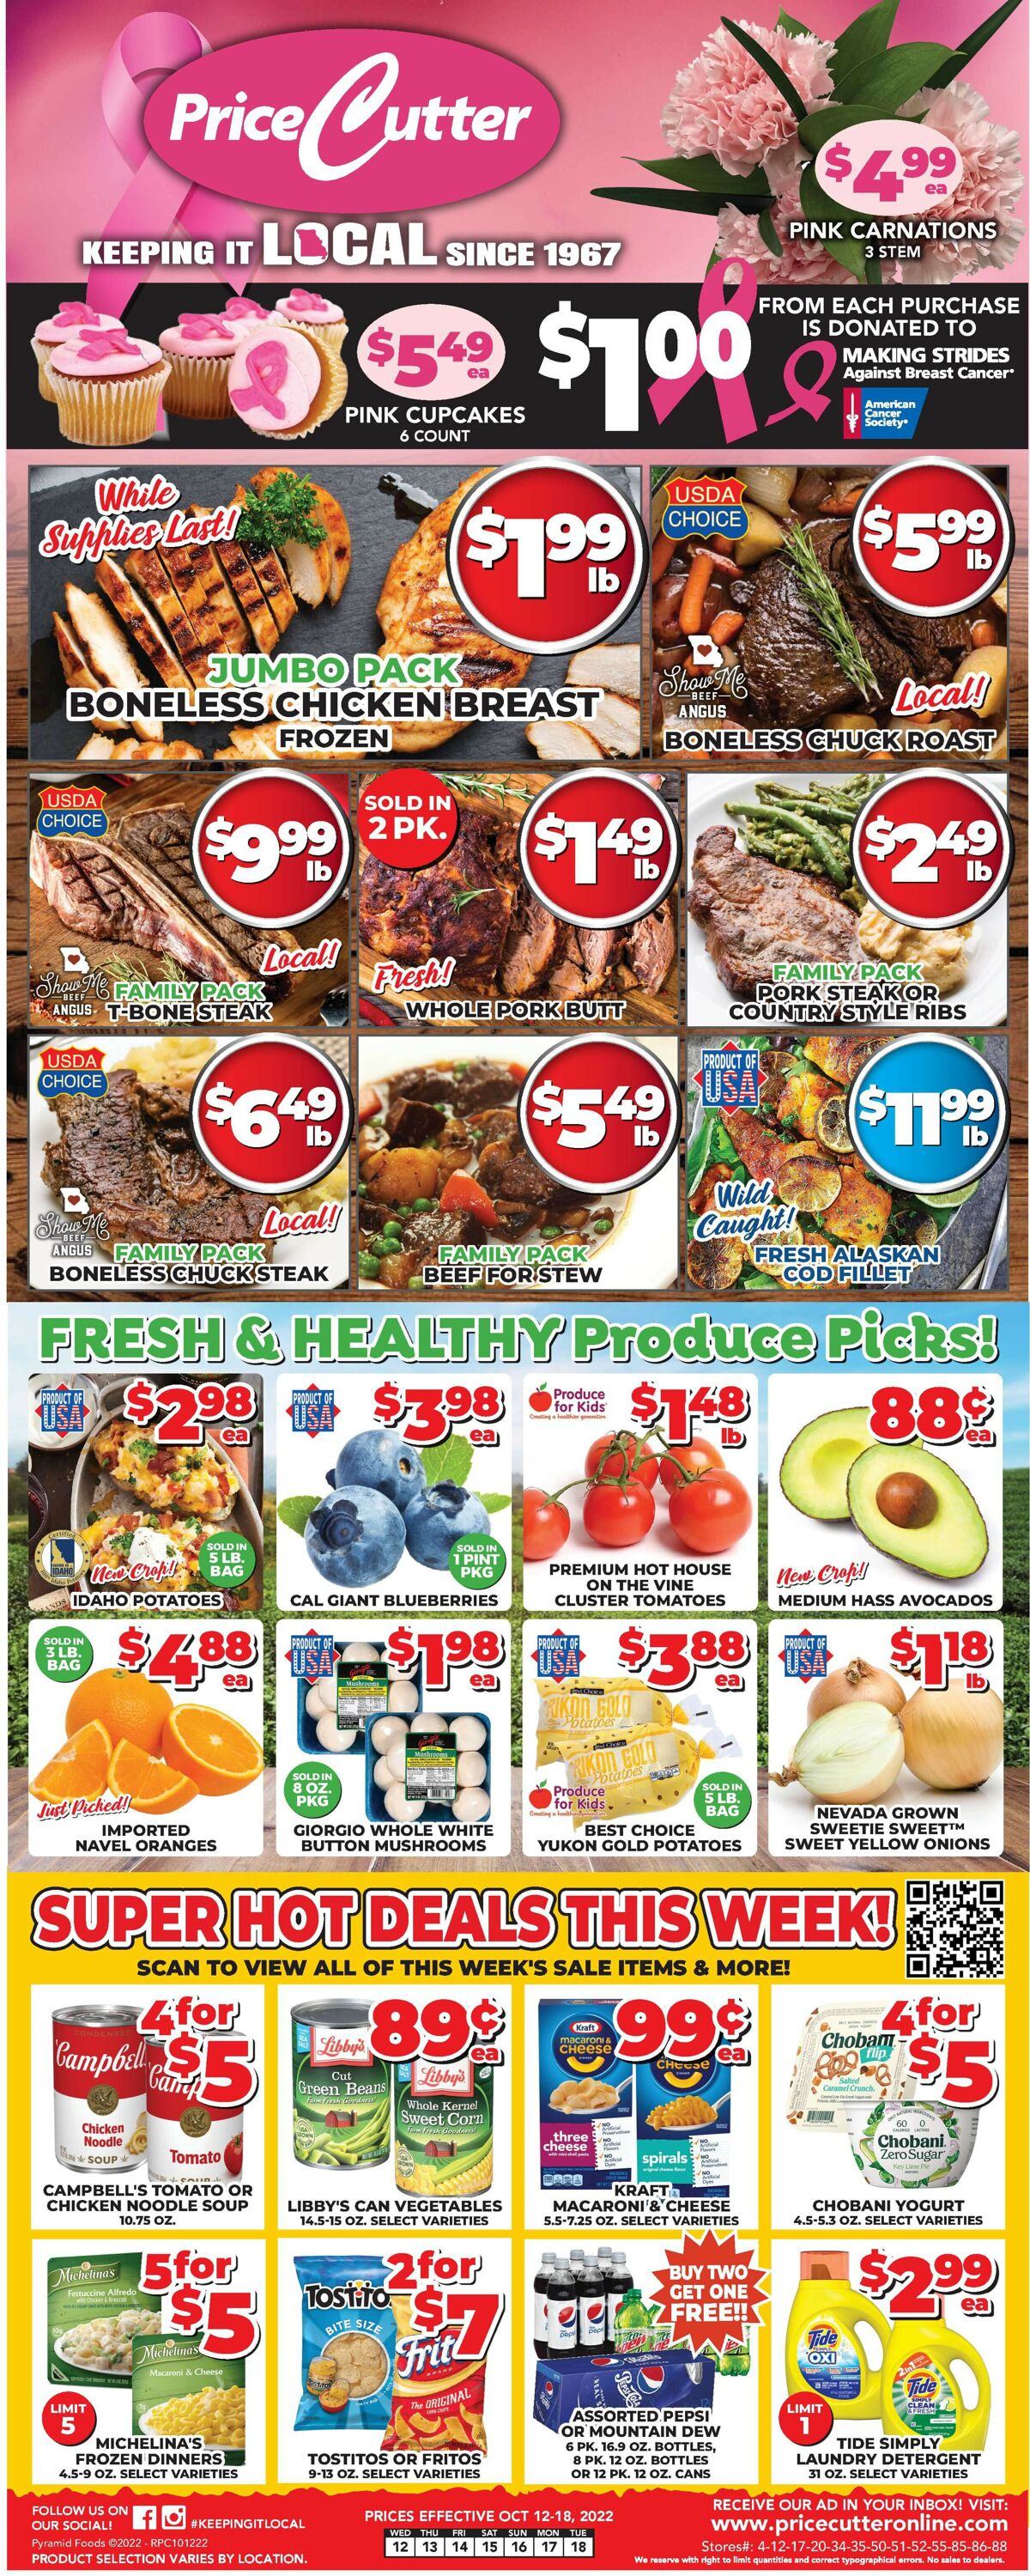 Price Cutter Weekly Ad Circular - valid 10/12-10/18/2022